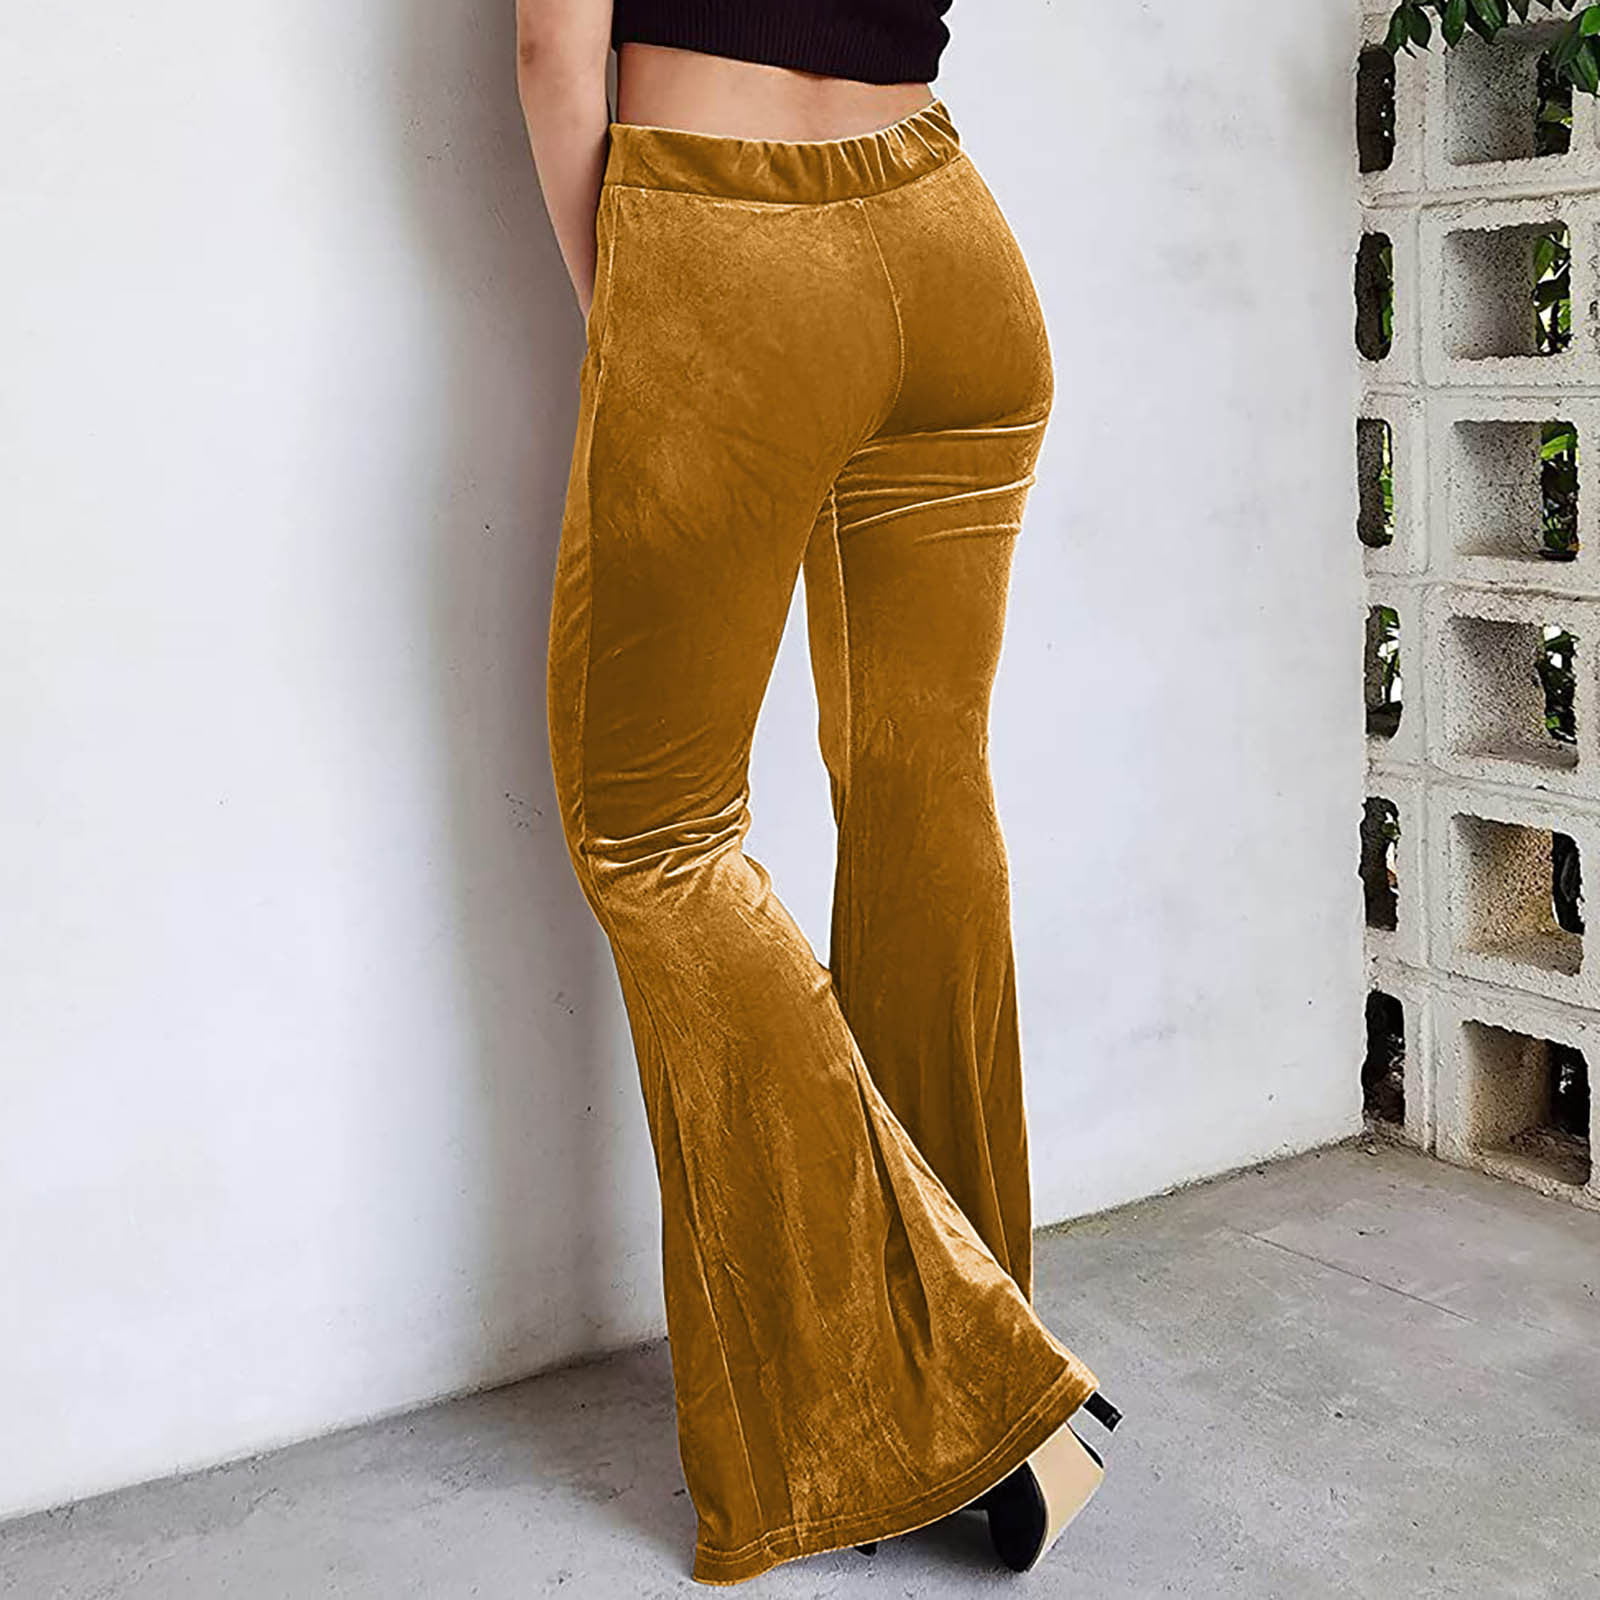 YWDJ Flare Pants for Women High Waist Elegant High Waist High Rise Flared  Elastic Waist Casual Stretchy Long Pant Fashion Comfortable Solid Color